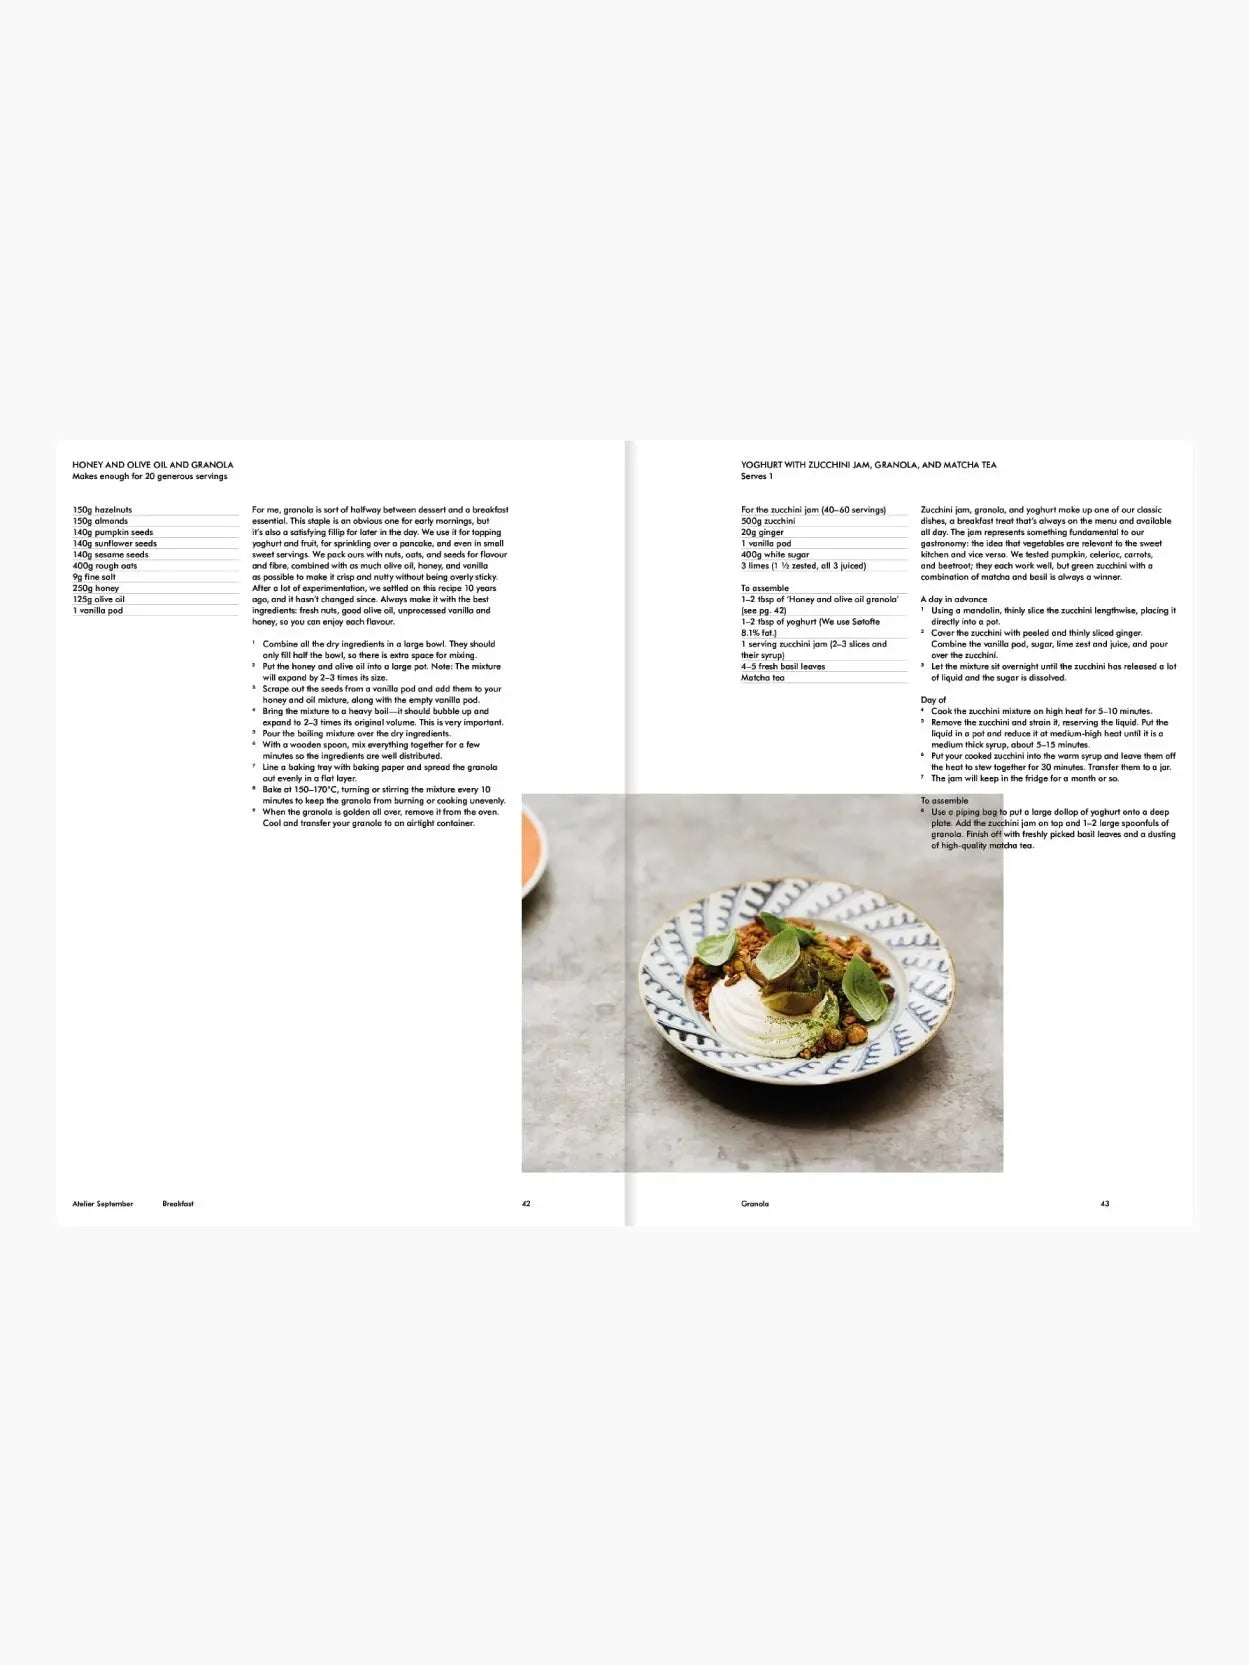 The image shows the cover of a book titled "Atelier September: A place for daytime cooking" by Frederik Bille Brahe, available at Bassalstore. The cover features a tall, artistic arrangement of white meringue on a plate set against a light gray background. The book is published by Apartamento in Barcelona.